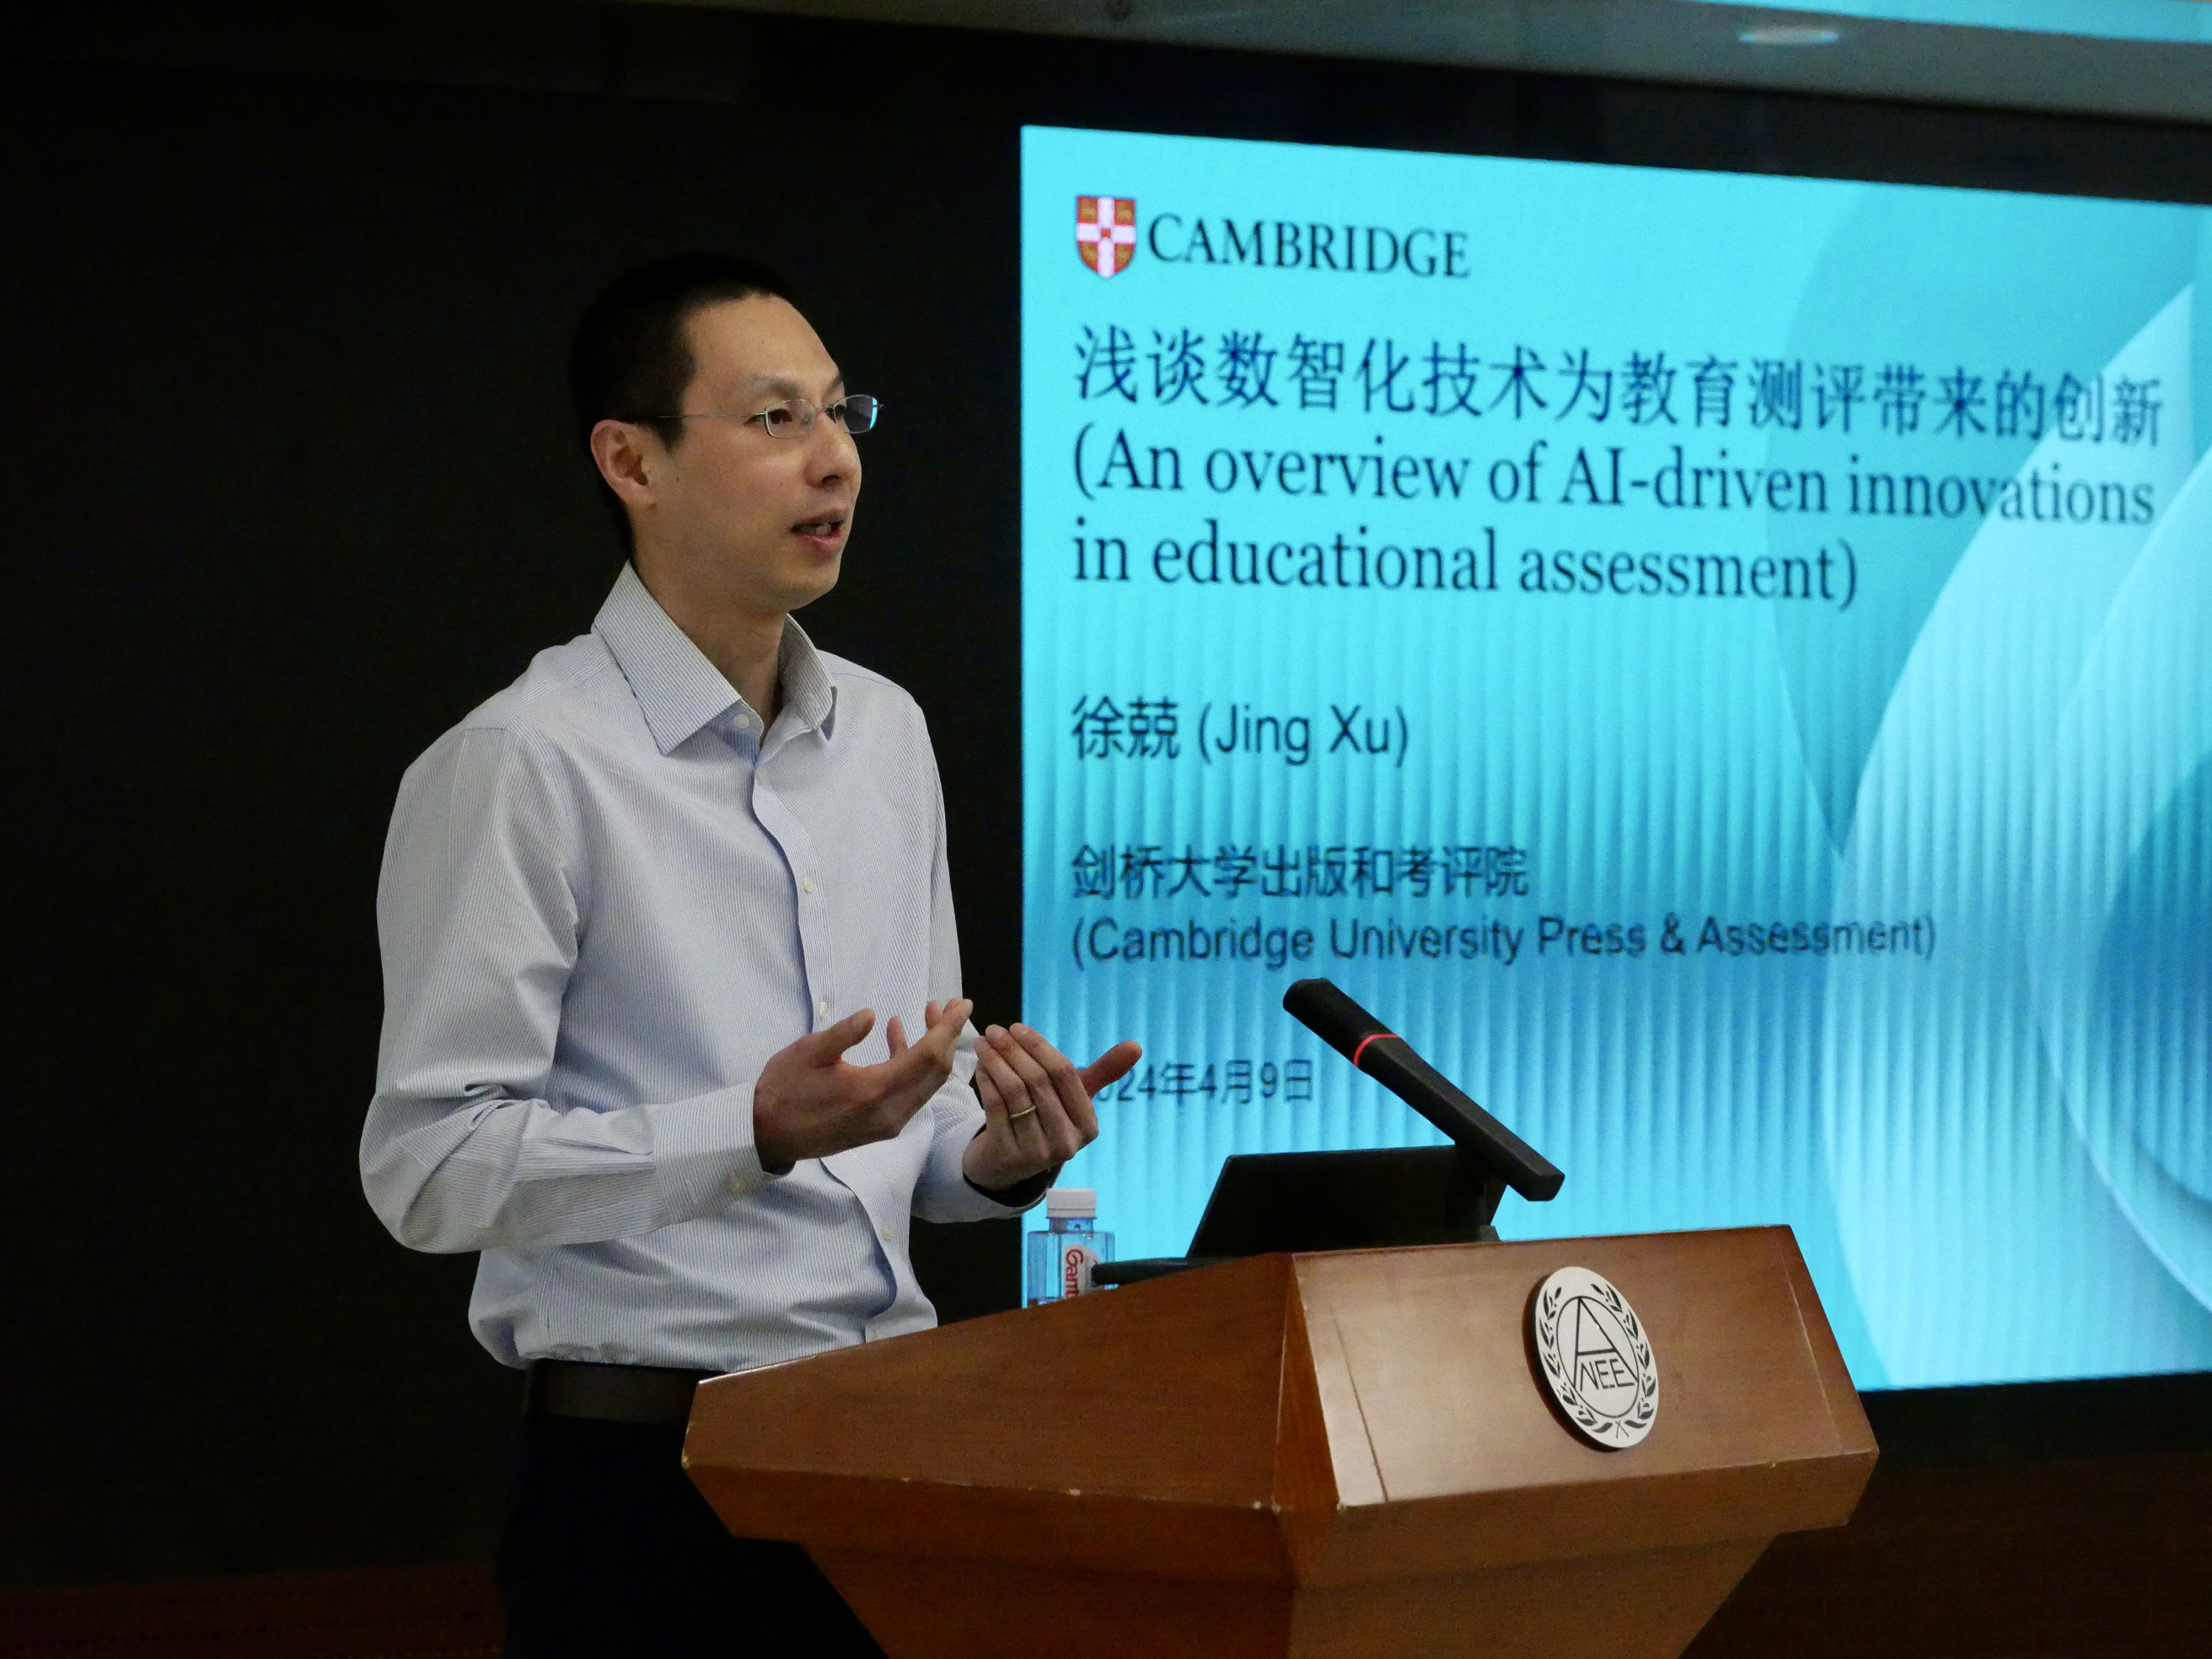 Dr Jing Xu, Head of Propositions Research